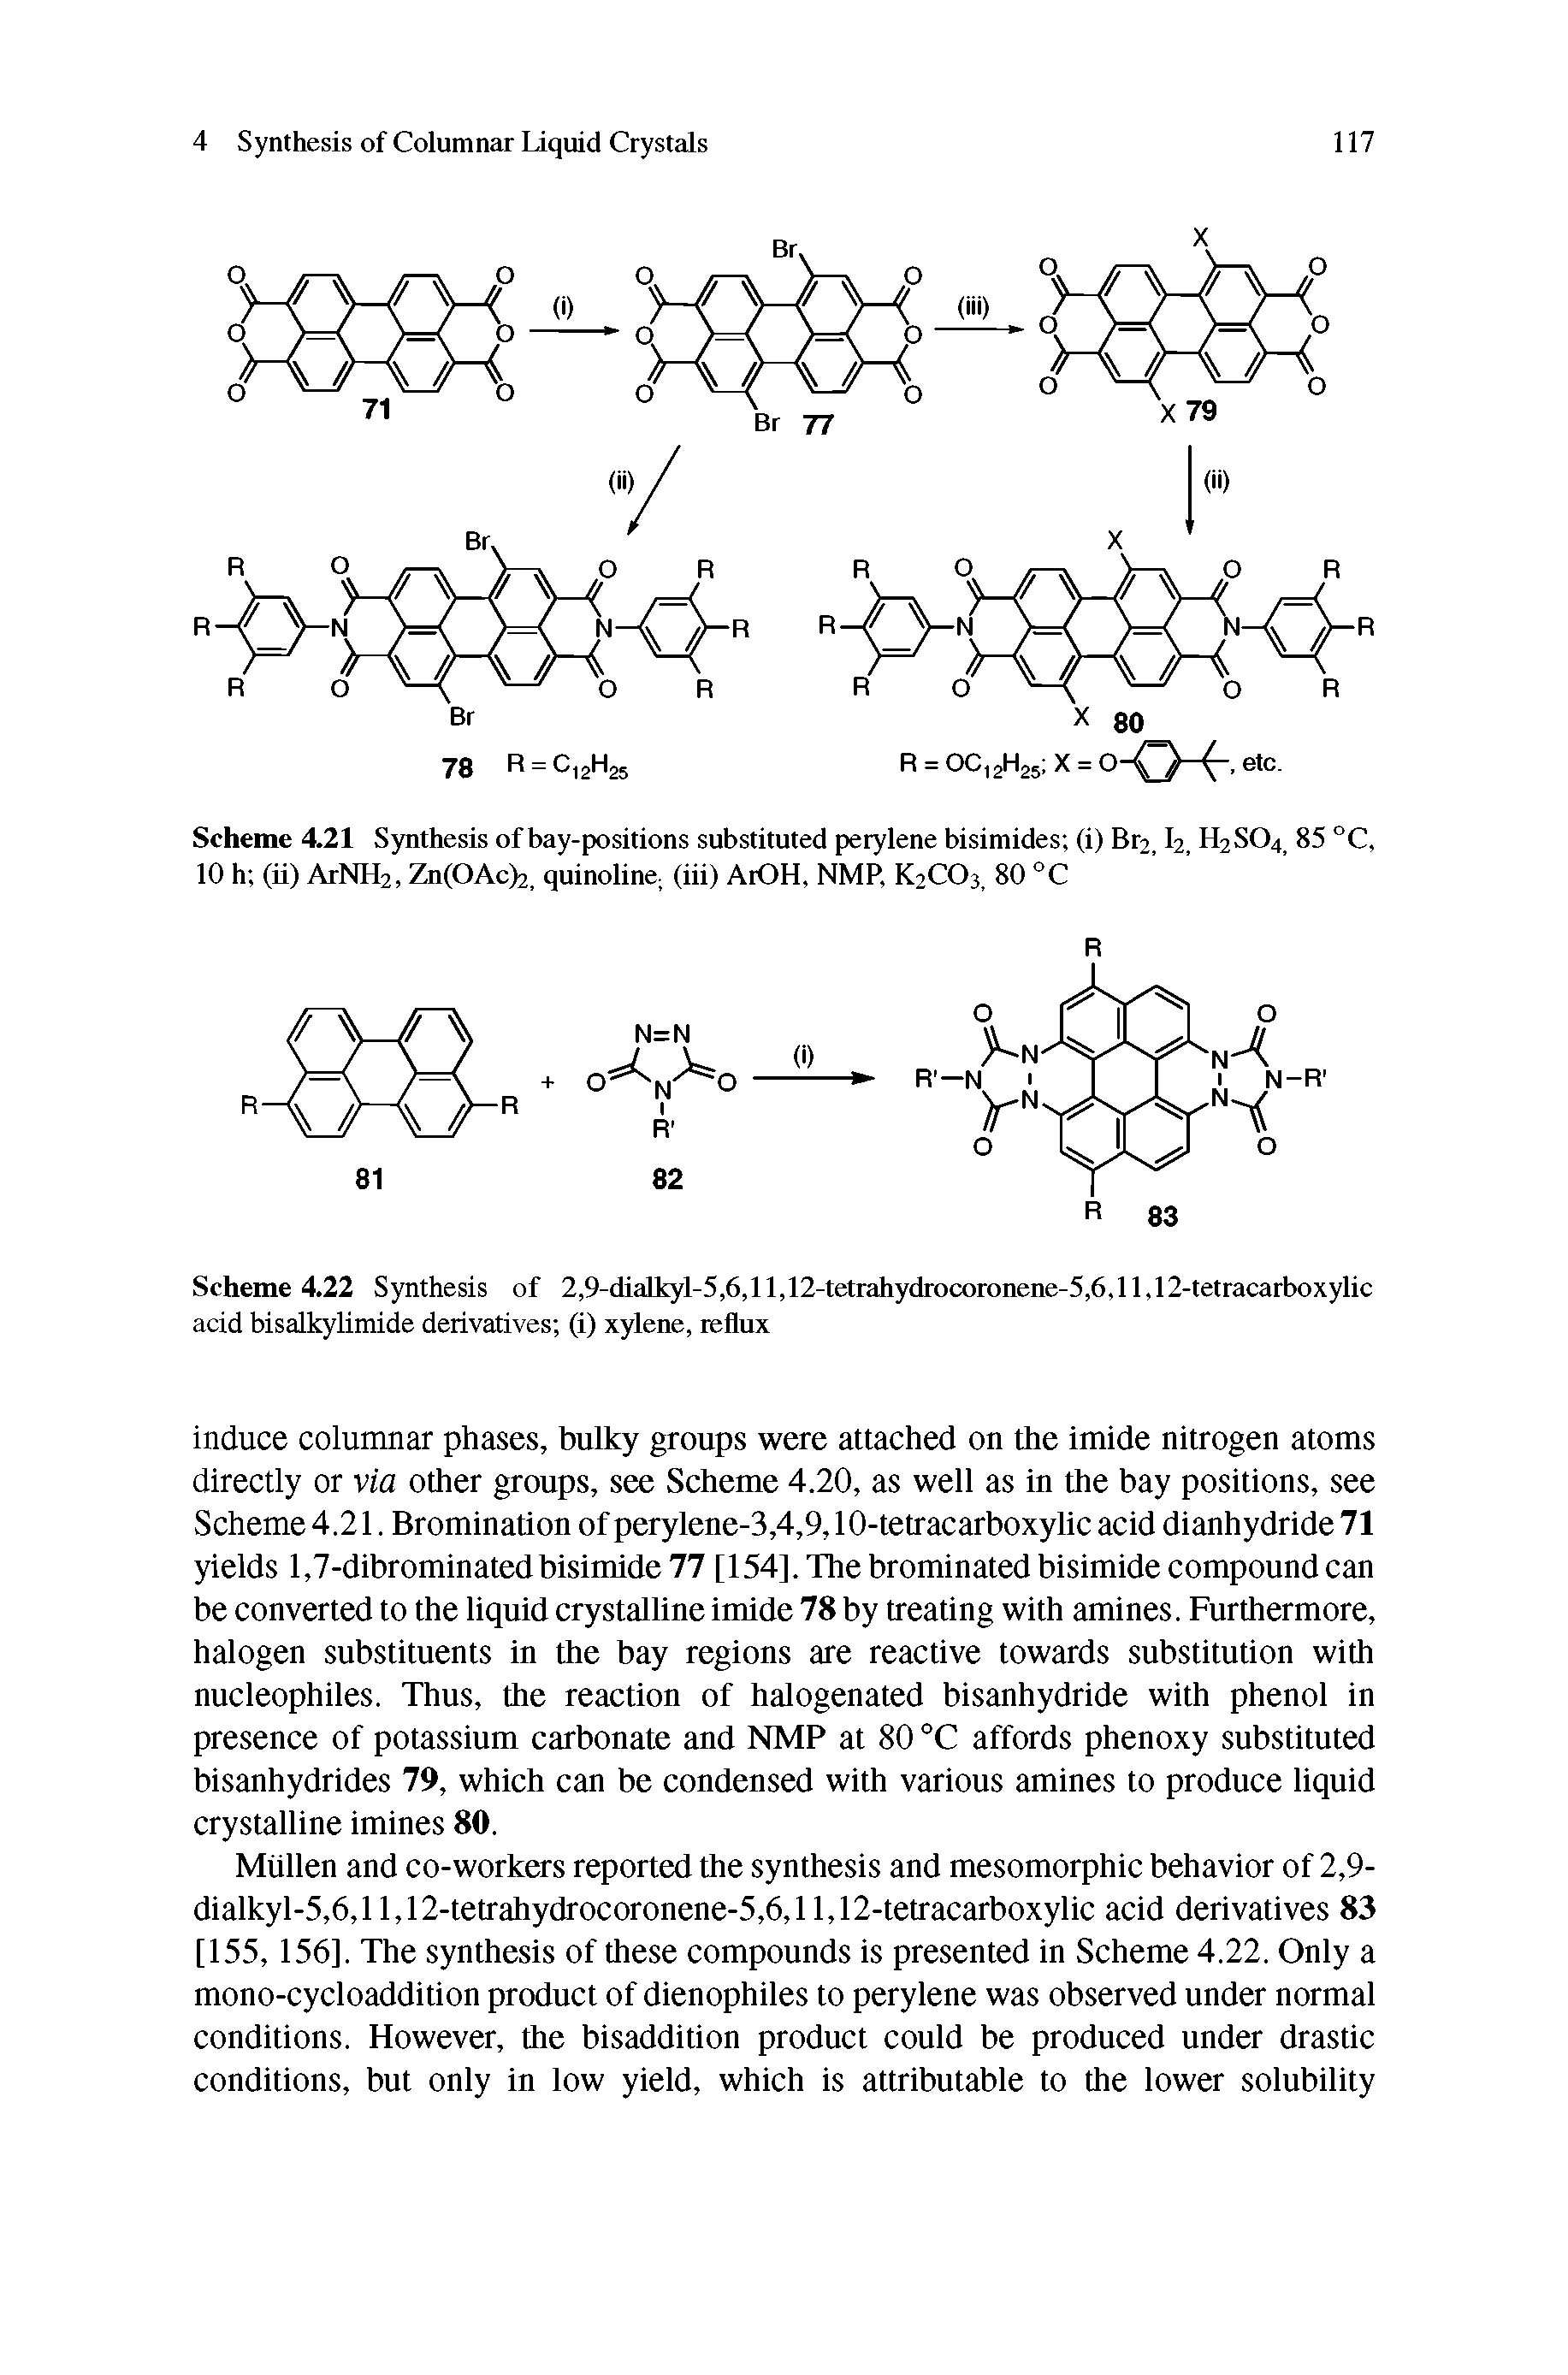 Scheme 4.21 Synthesis of bay-positions substituted perylene bisimides (i) Br2,12, H2S04 85 °C, 10 h (ii) ArNH2, Zn(OAc>2, quinoline (iii) AiOH, NMP, K2CO3, 80 °C...